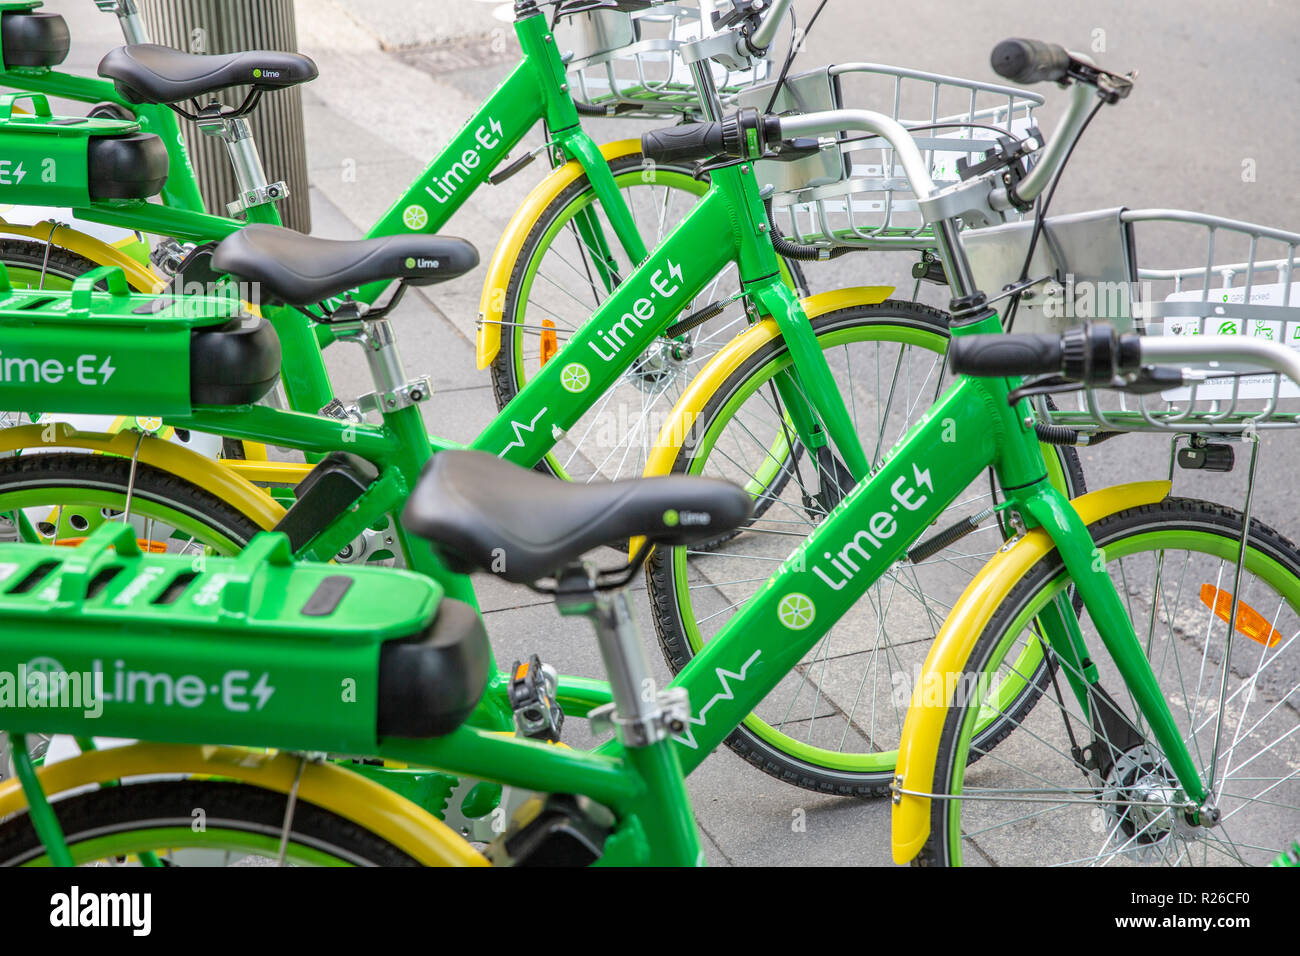 Limebike Dockless Lime e electric bicycles in Sydney city centre,NSW,  Australia Stock Photo - Alamy